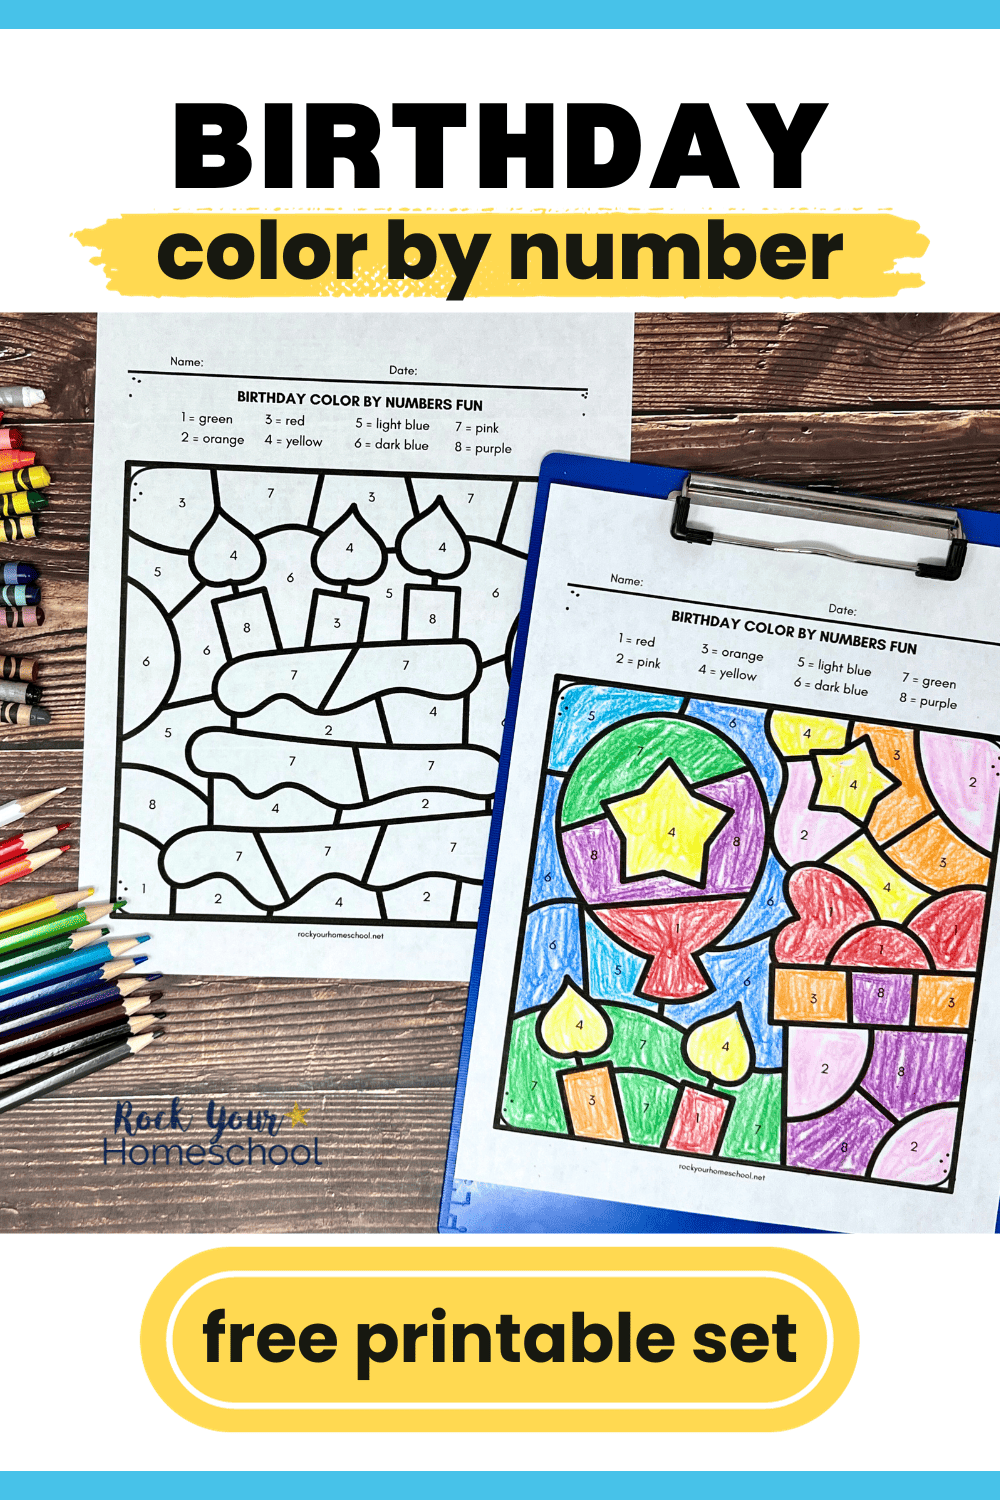 Examples of free printable birthday color by number activities.